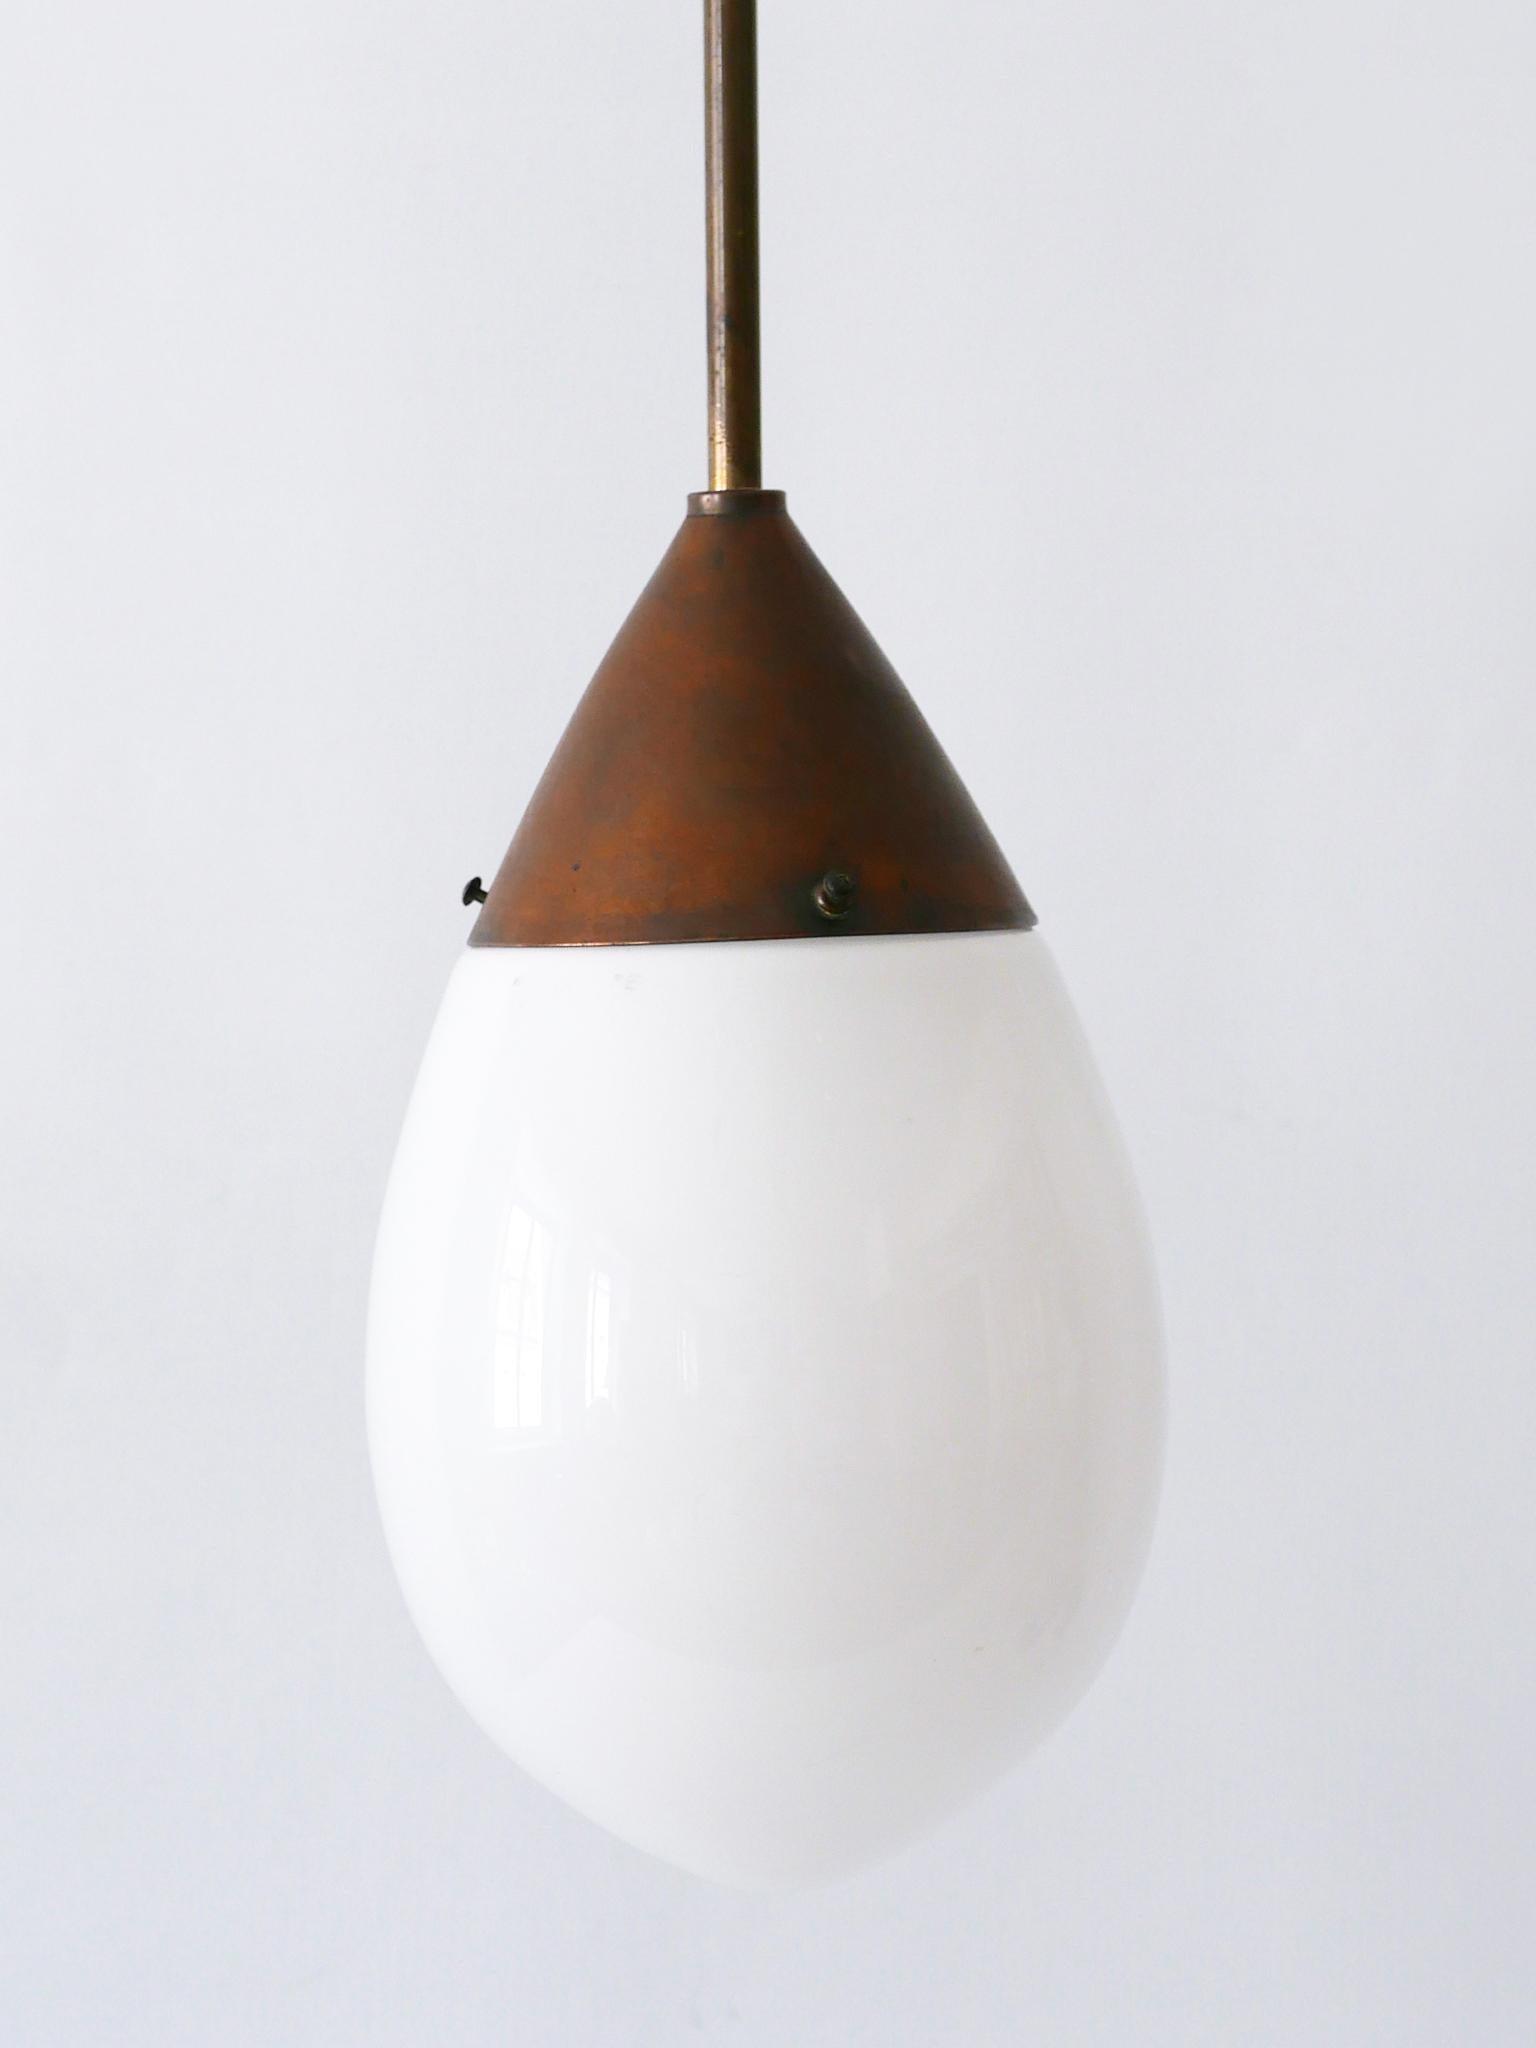 Exceptional Bauhaus Pendant Lamp or Hanging Light Drop by Siemens 1920s, Germany For Sale 1